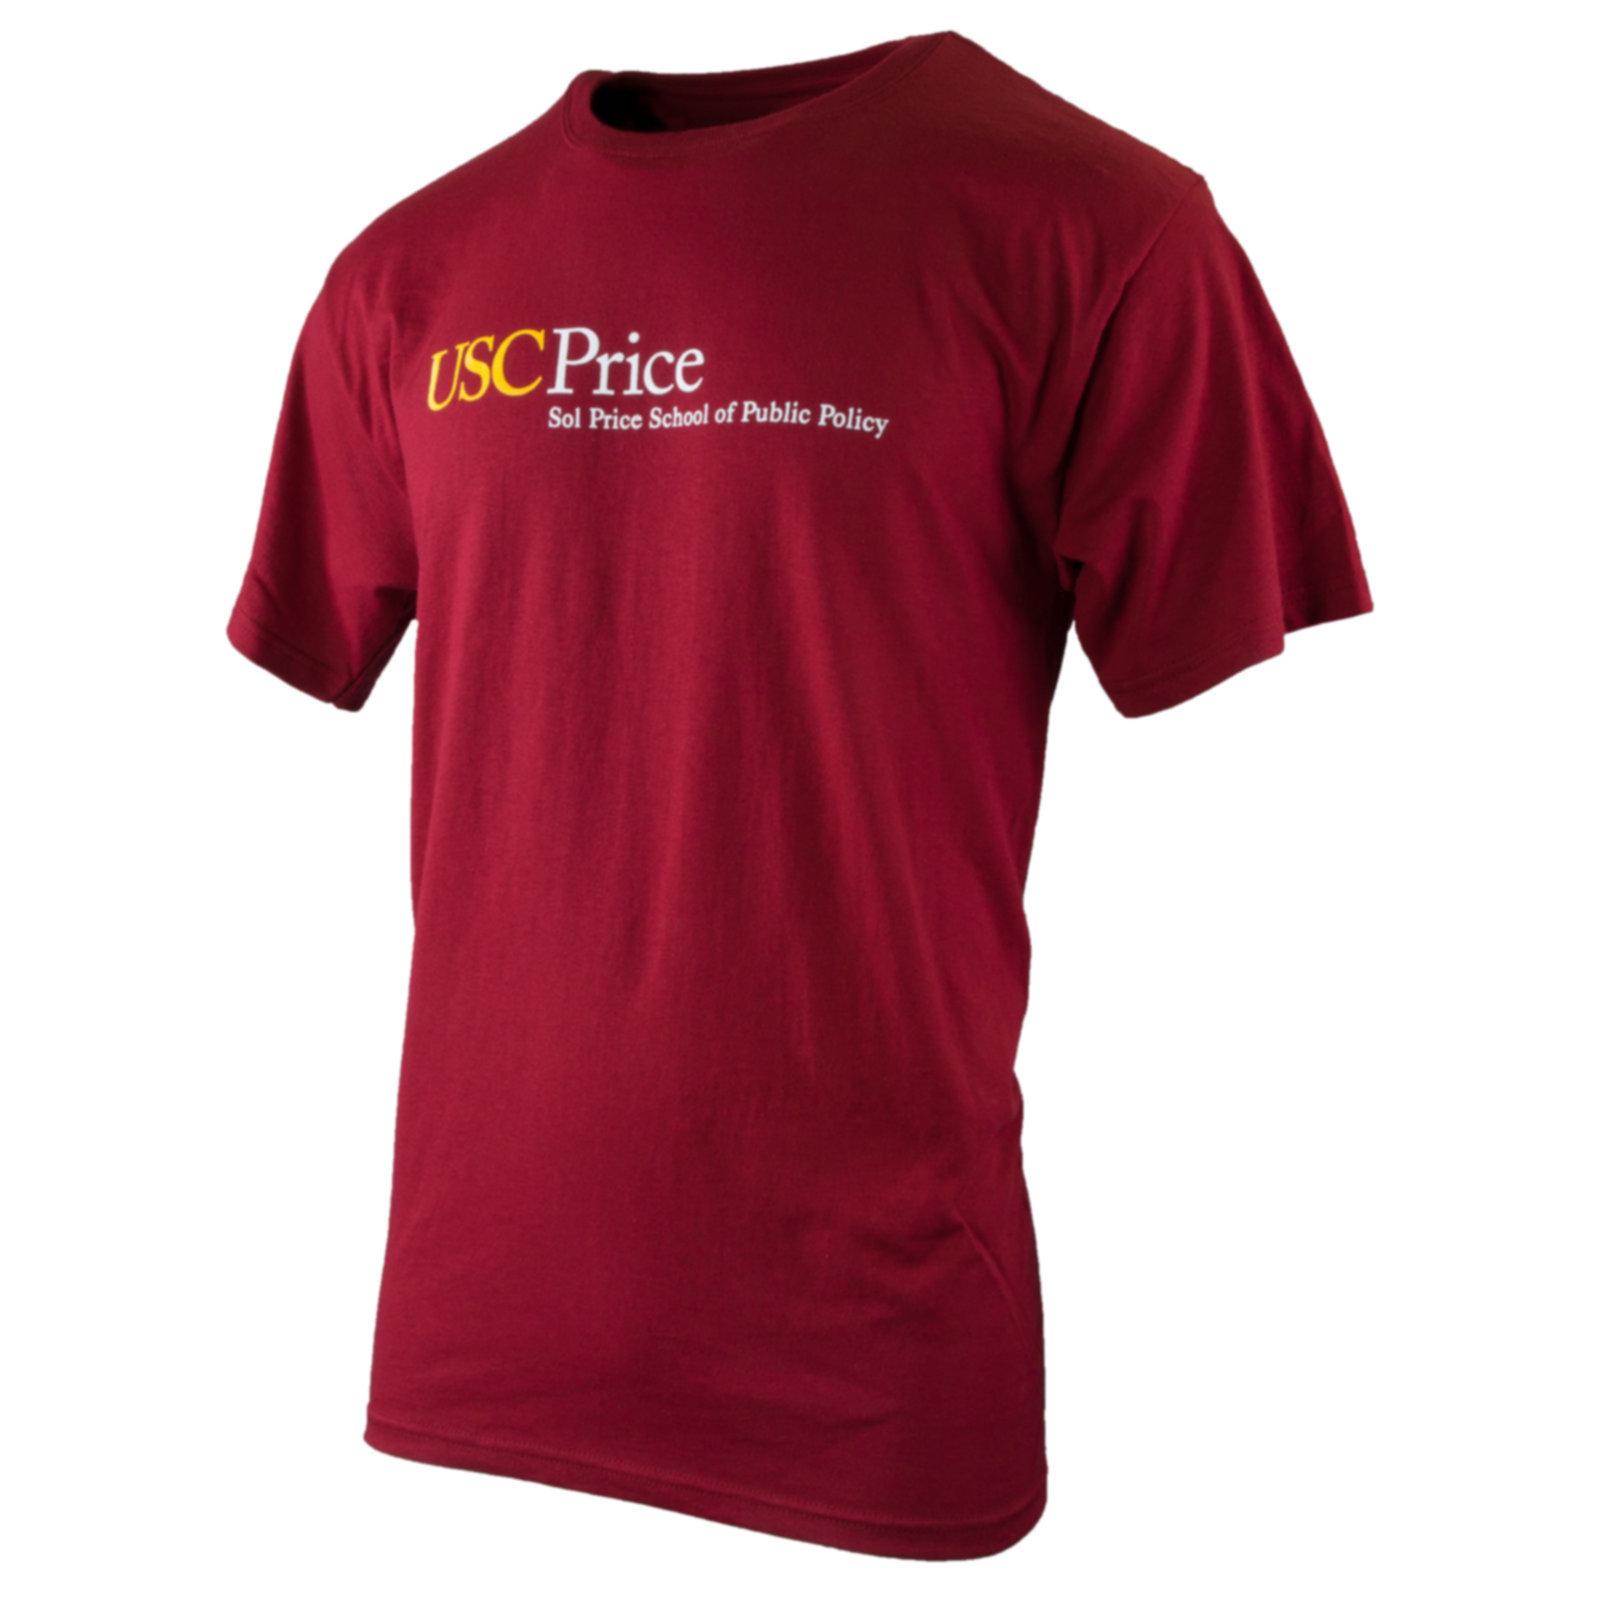 USC School of Price Public Policy SS Tee image01